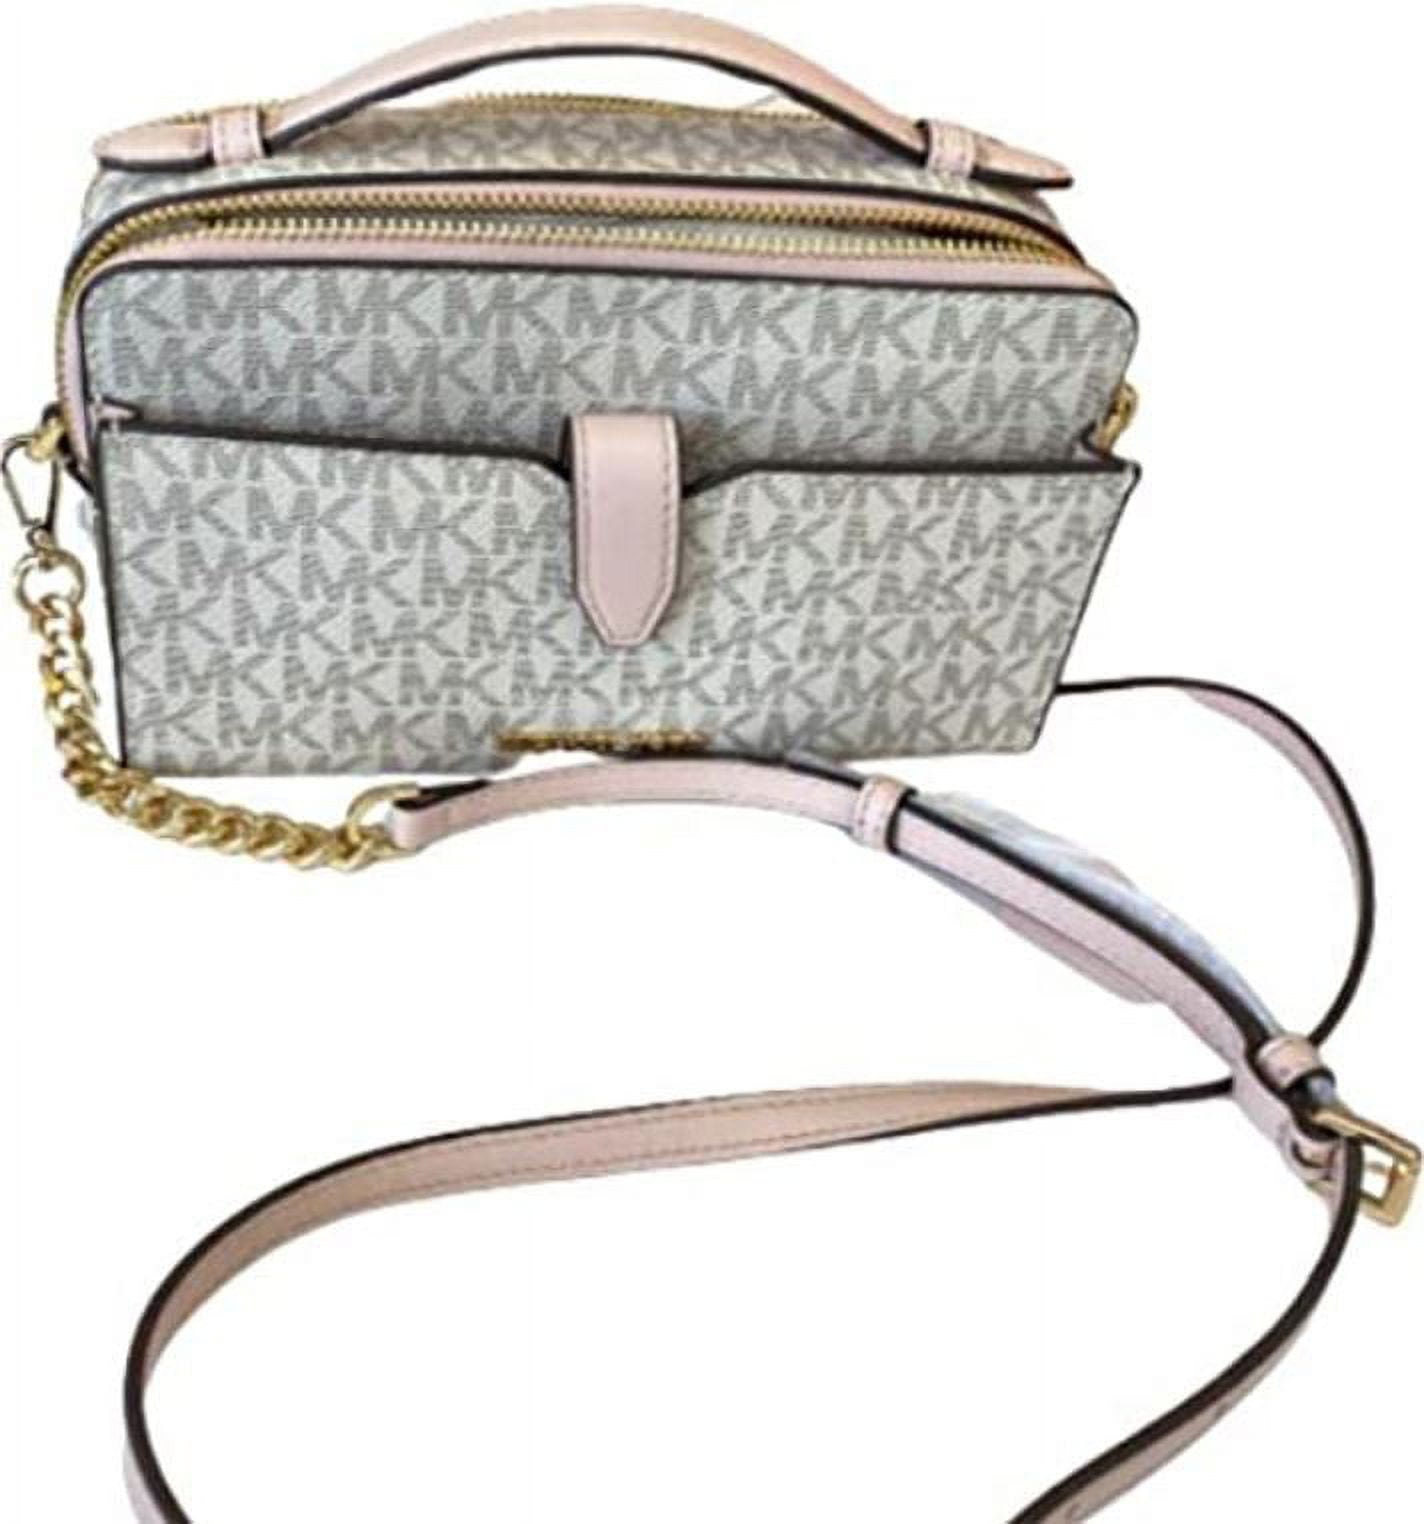 Glamfox - Checker Multi Pouch Crossbody Bag - 2 Colors Available